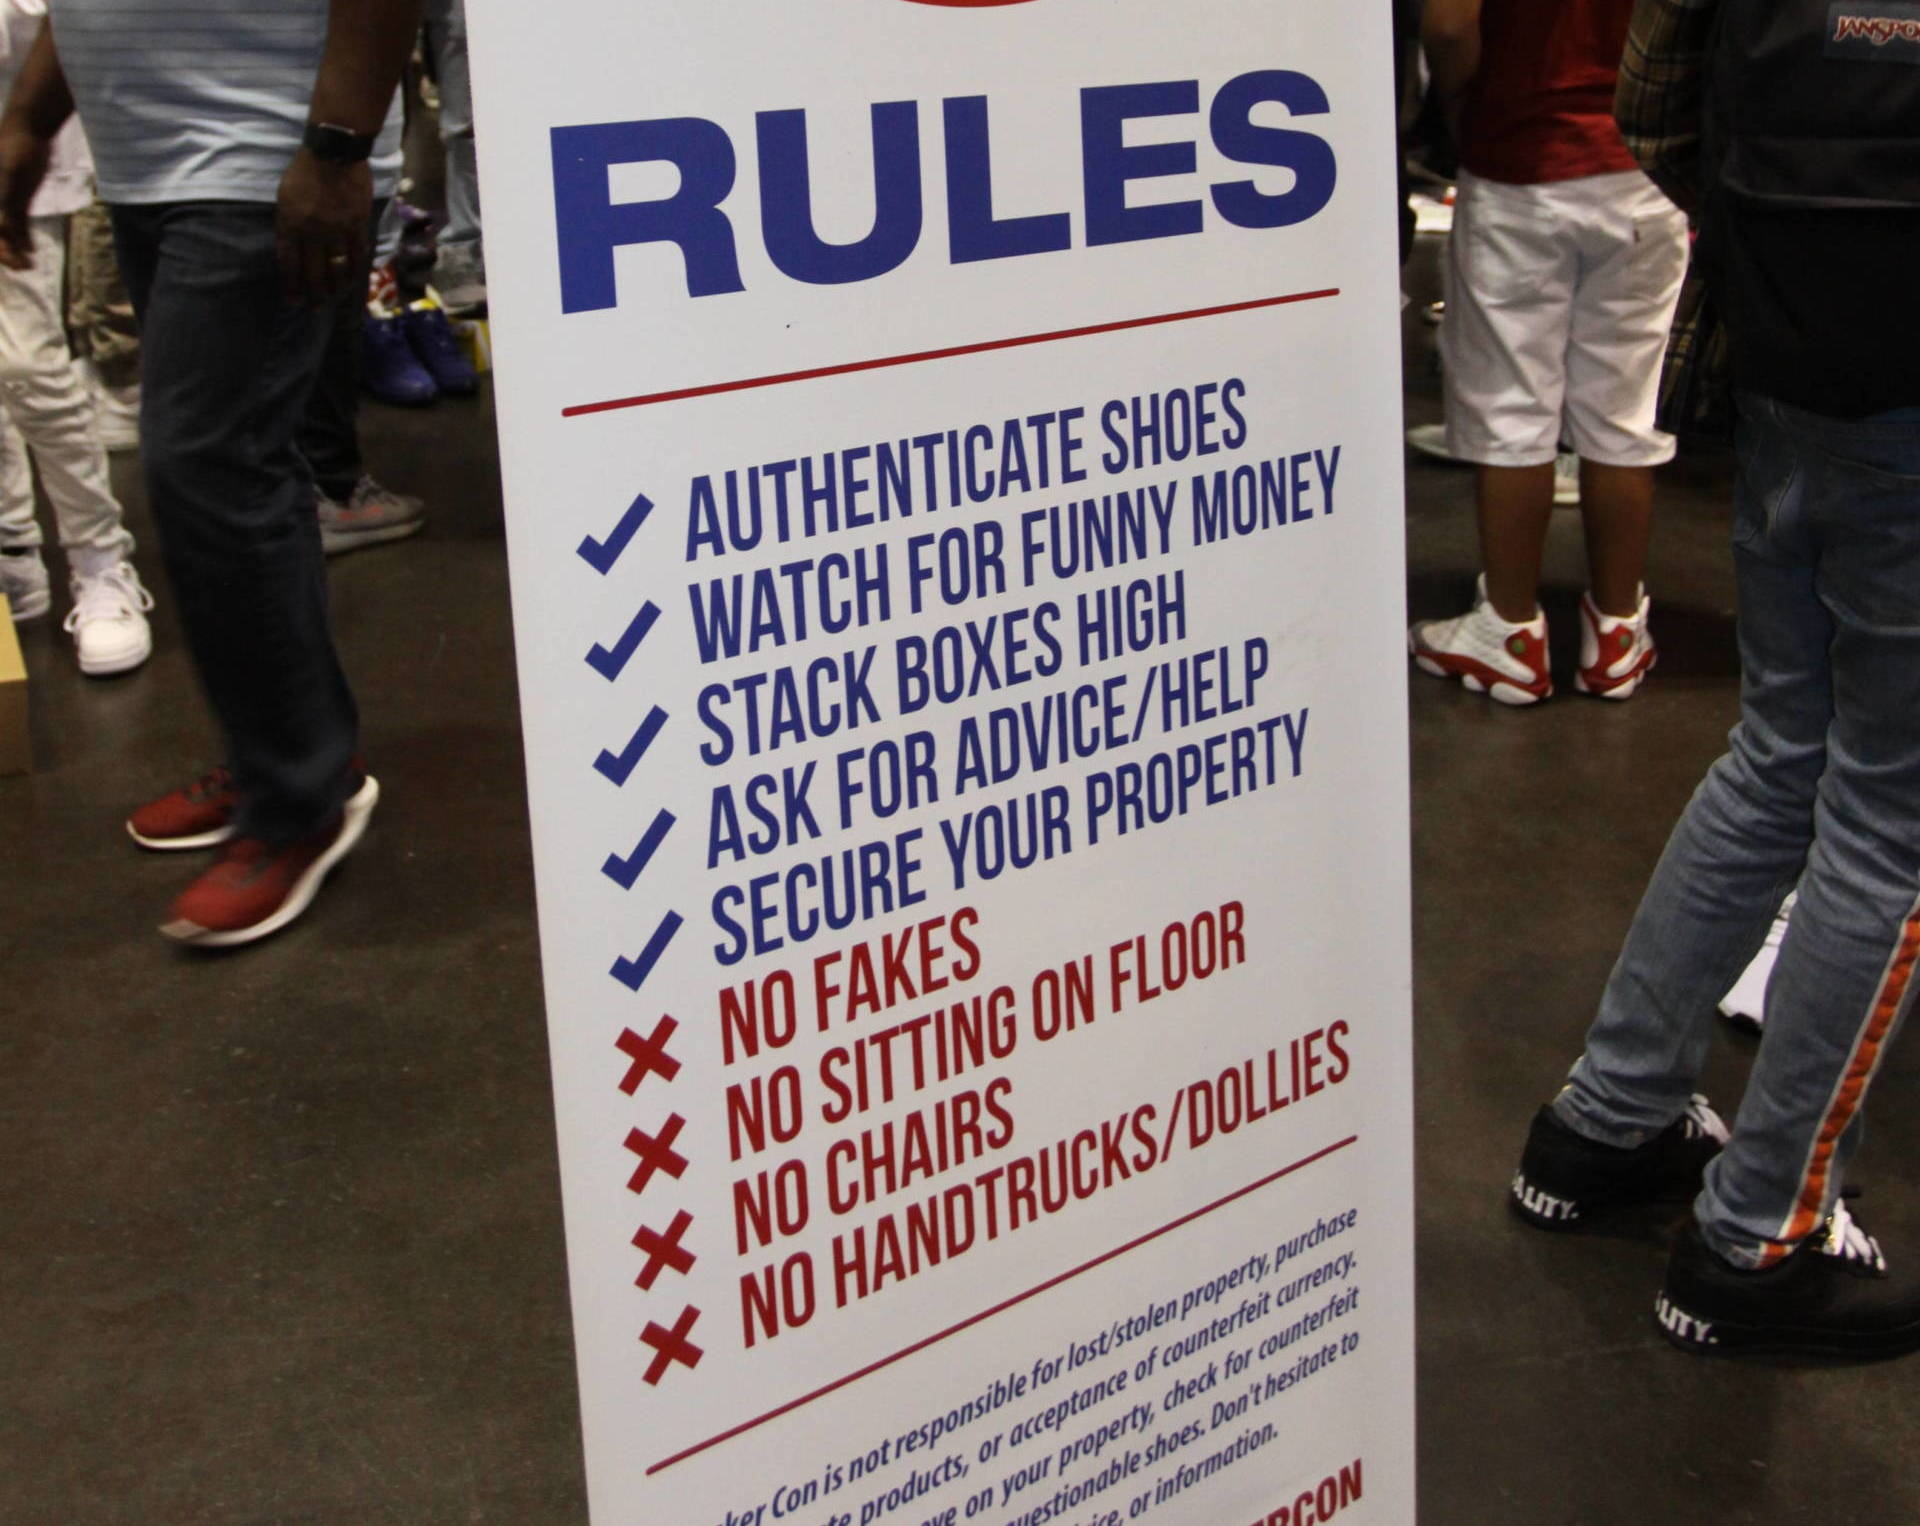 Buyers and sellers can set up informal displays on the floor of the Sneaker Con Trading Pit. This sign lays down some ground rules.